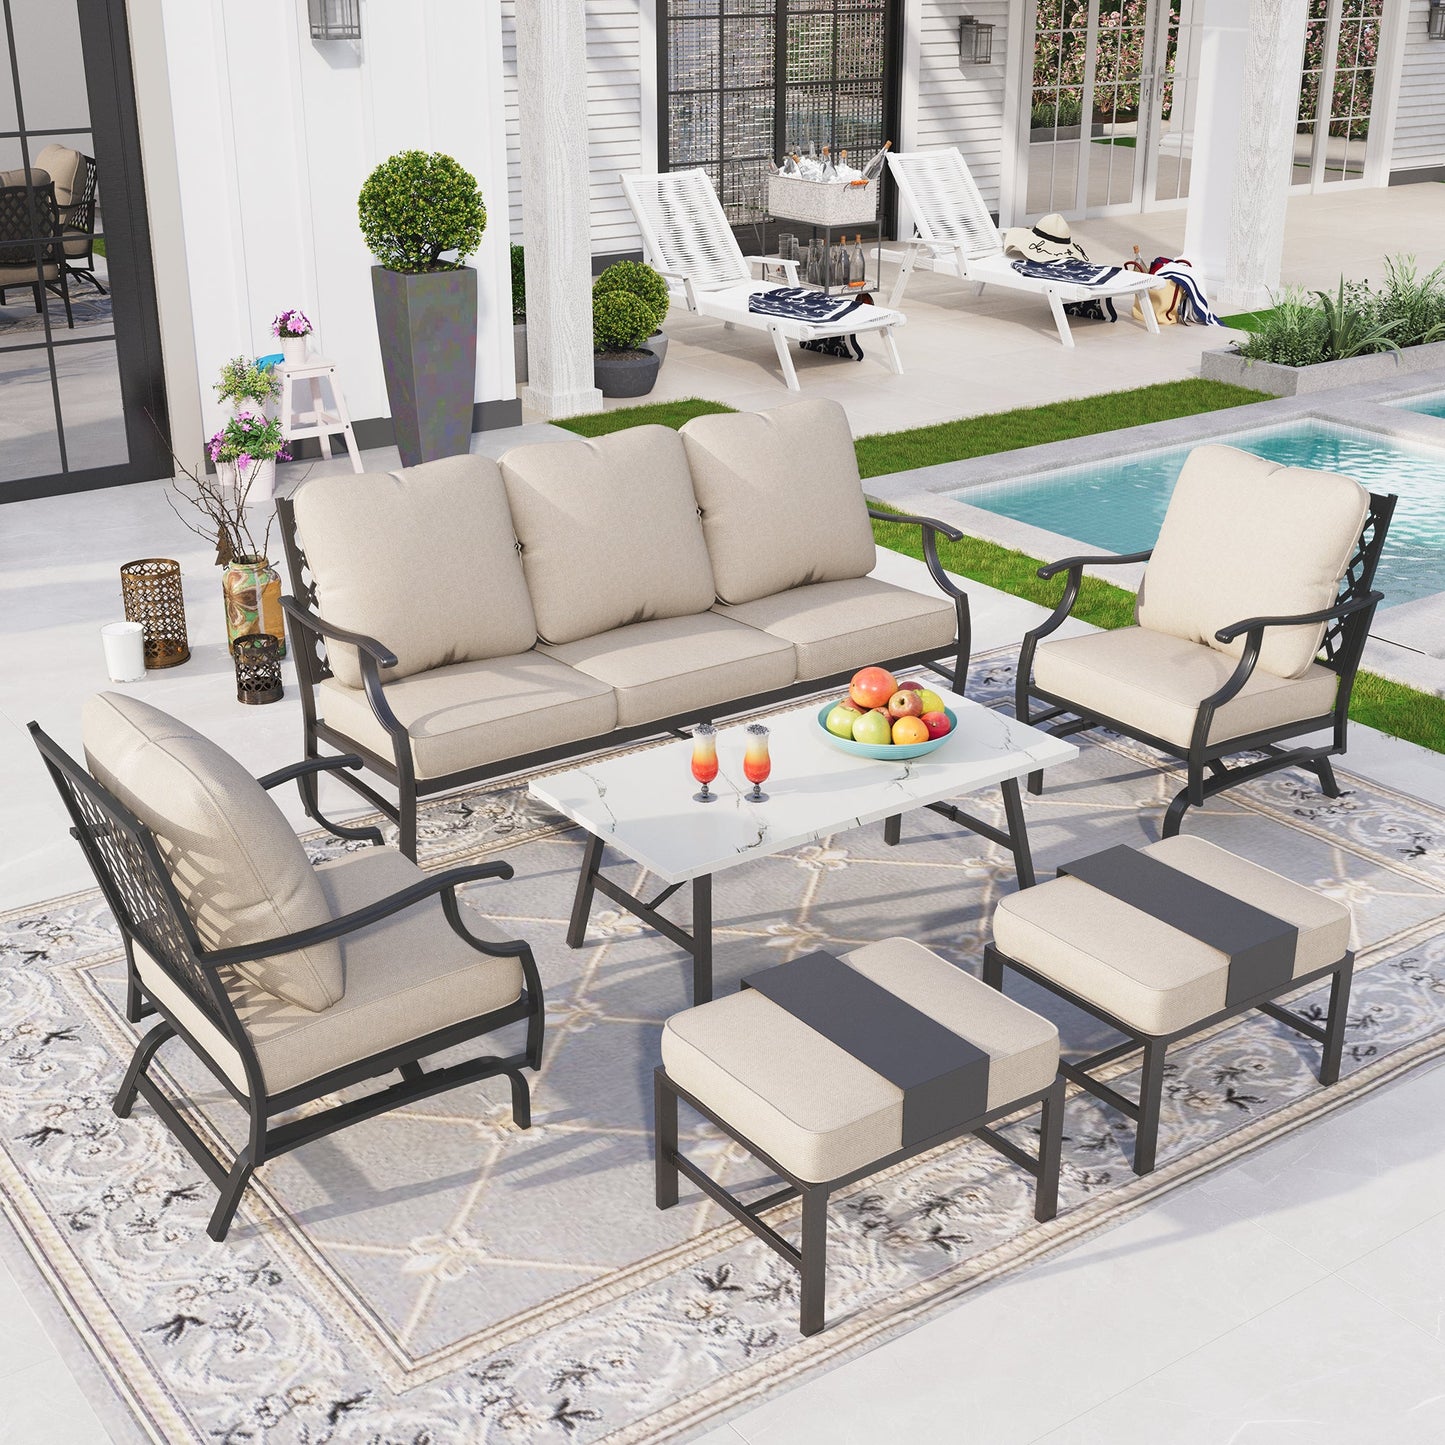 Sophia&William 6 Piece Patio Conversation Set Outdoor Table and Rocking Chairs Furniture Set with Ottomans